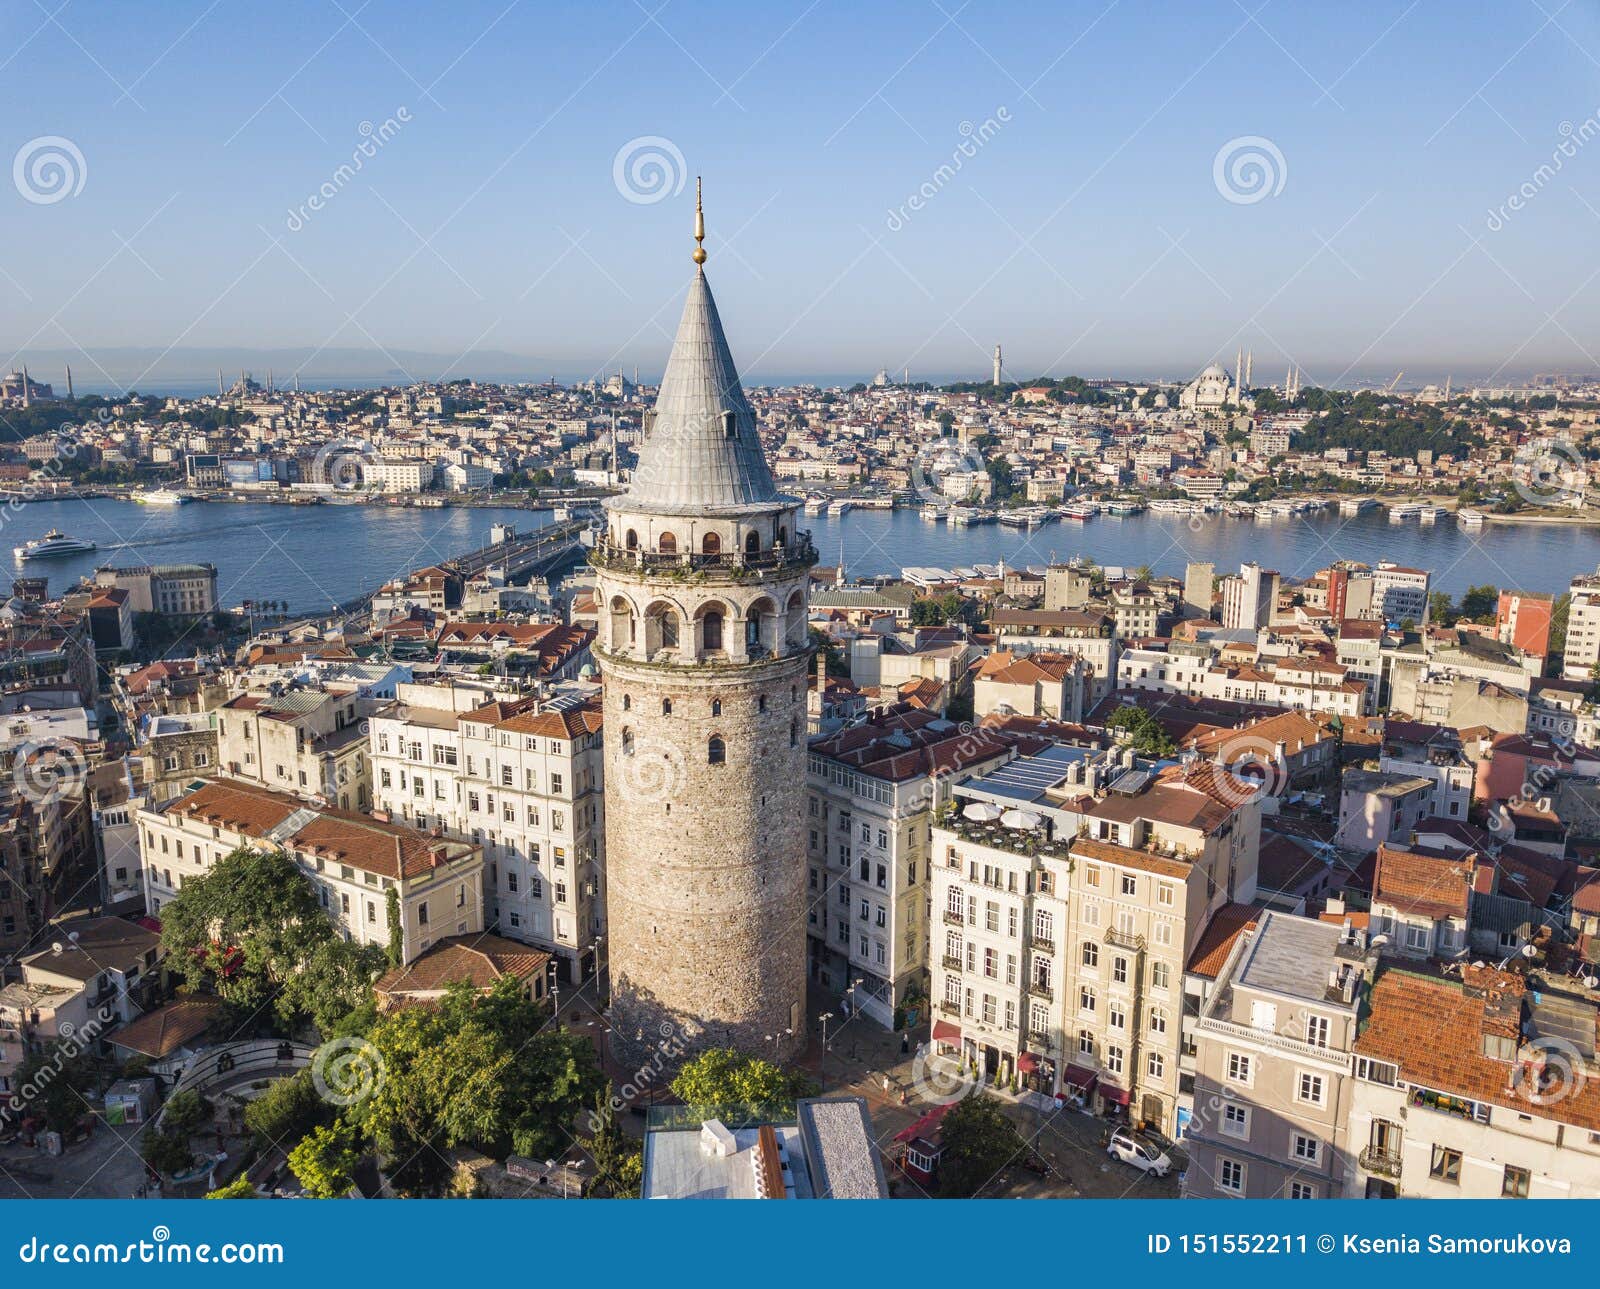 galata tower. istanbul city aerial view